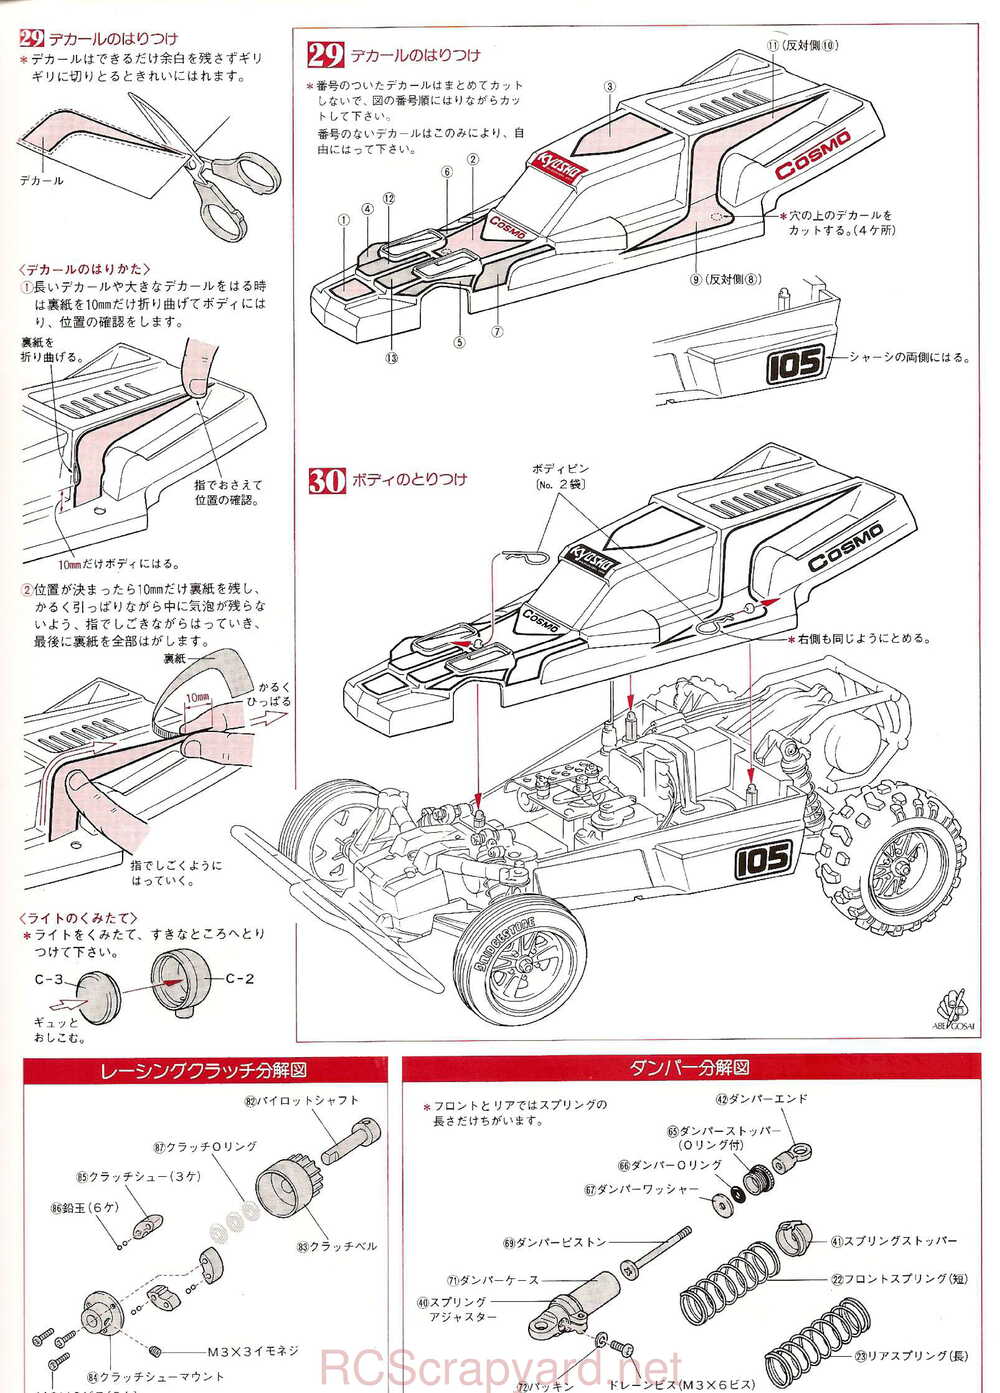 Kyosho - 3084 - Cosmo - Manual - Page 13